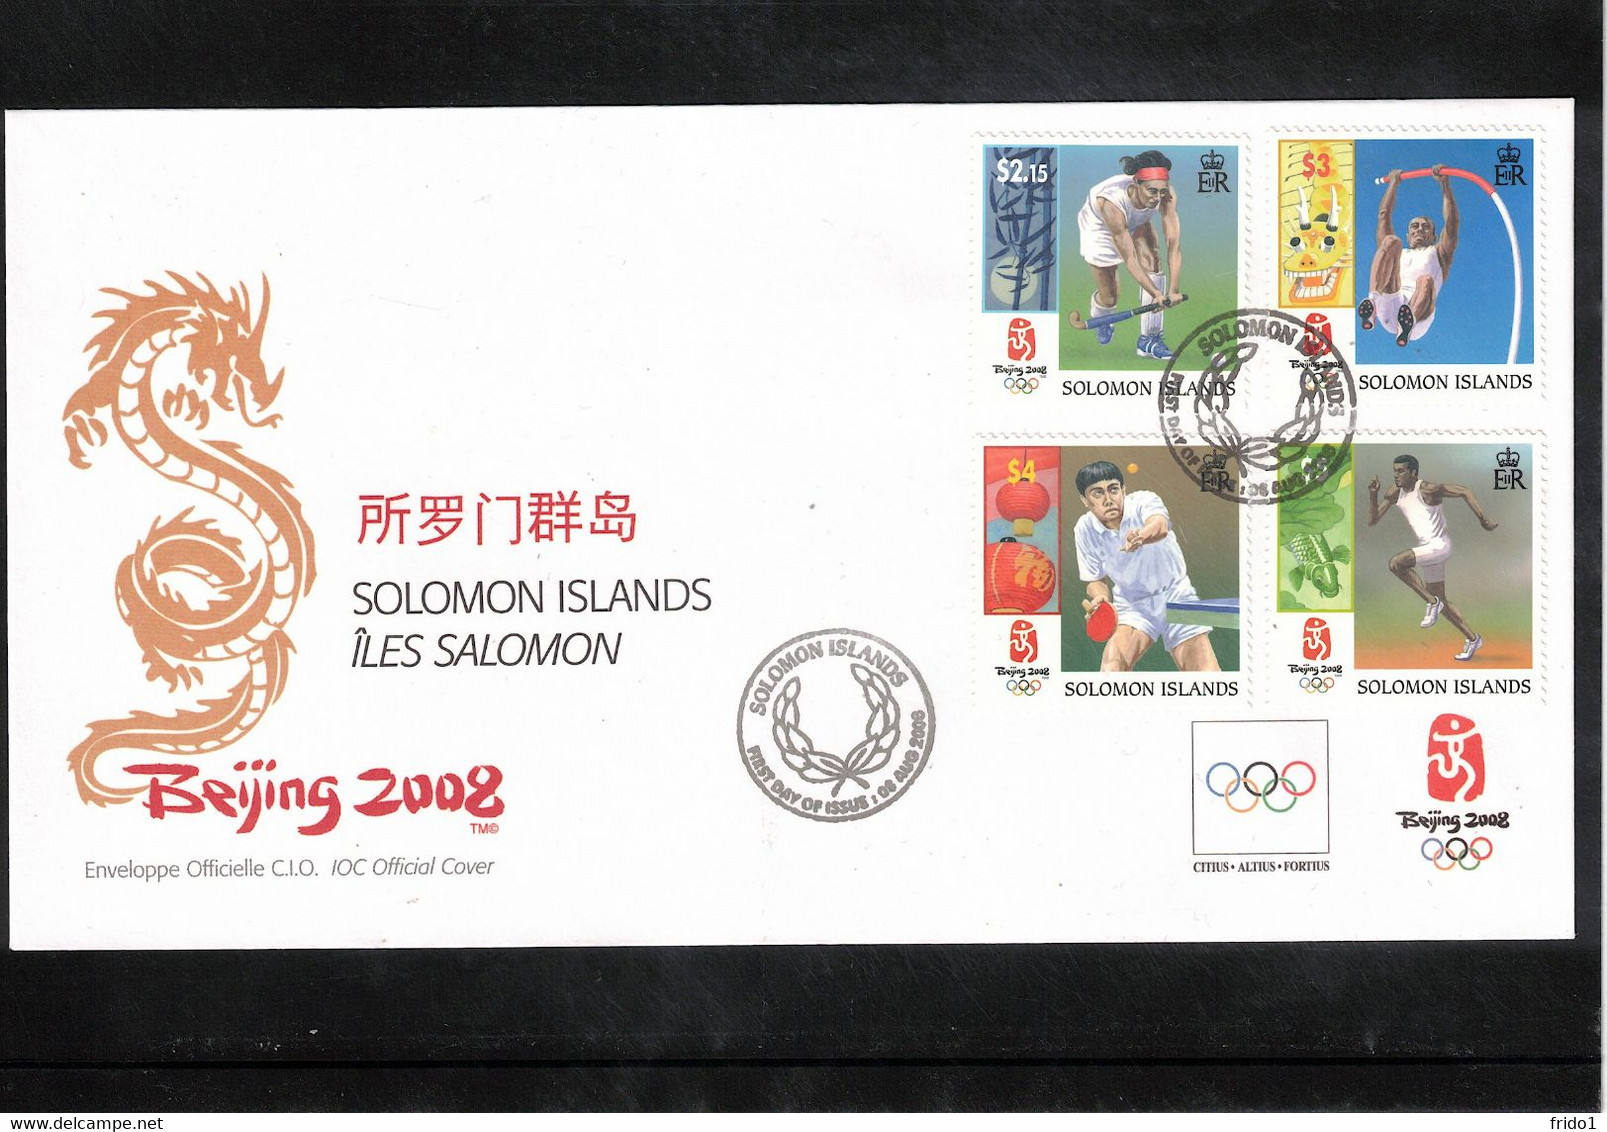 Solomon Islands 2008 Table Tennis - Olympic Games Beijing FDC - Table Tennis